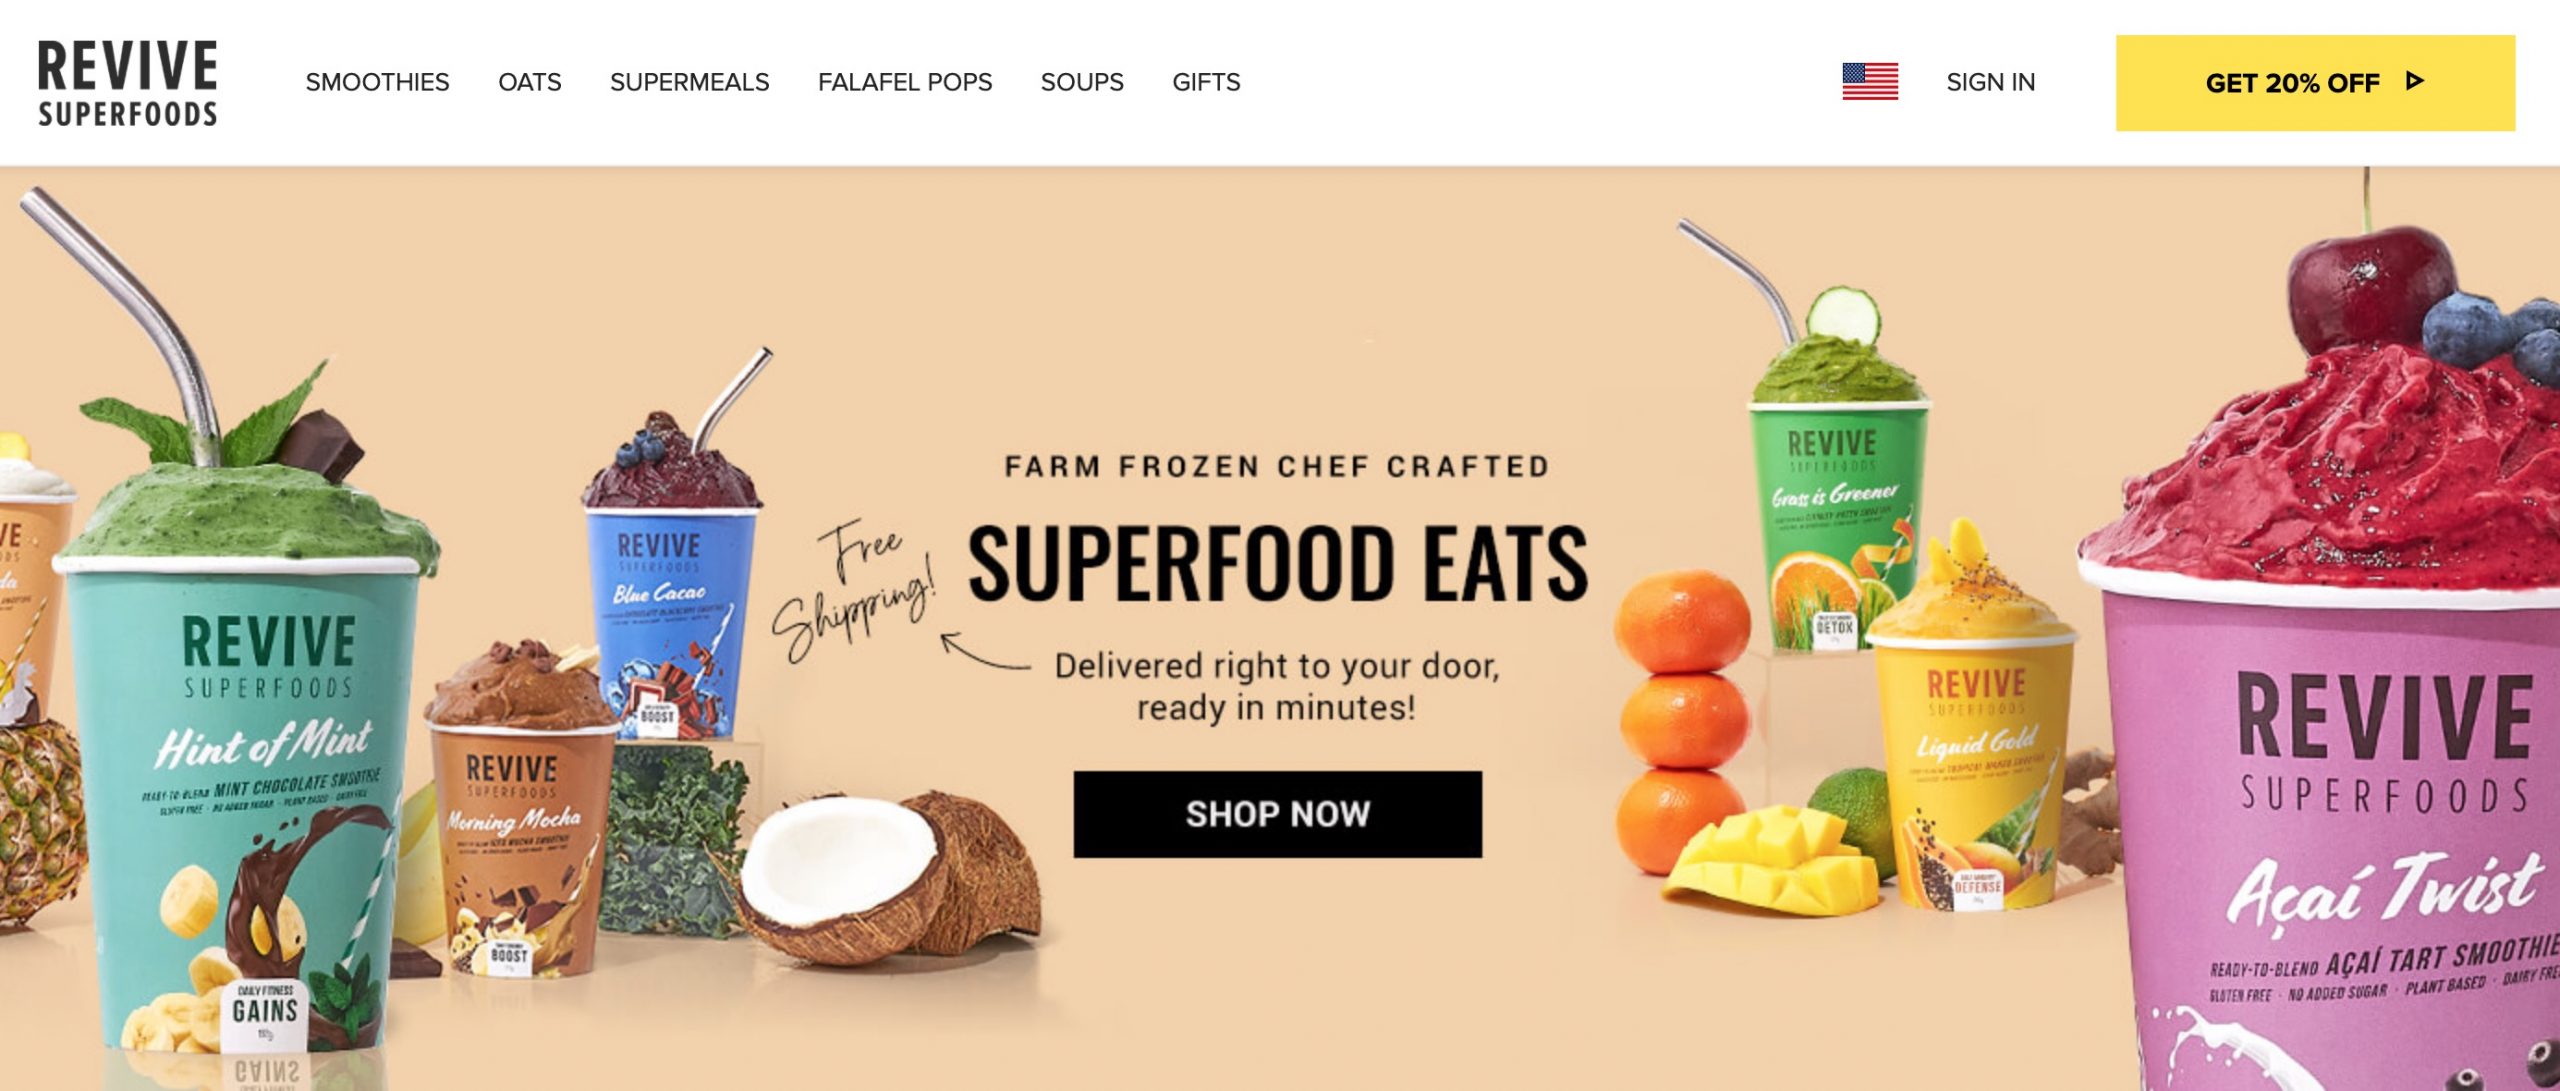 revive superfoods main page